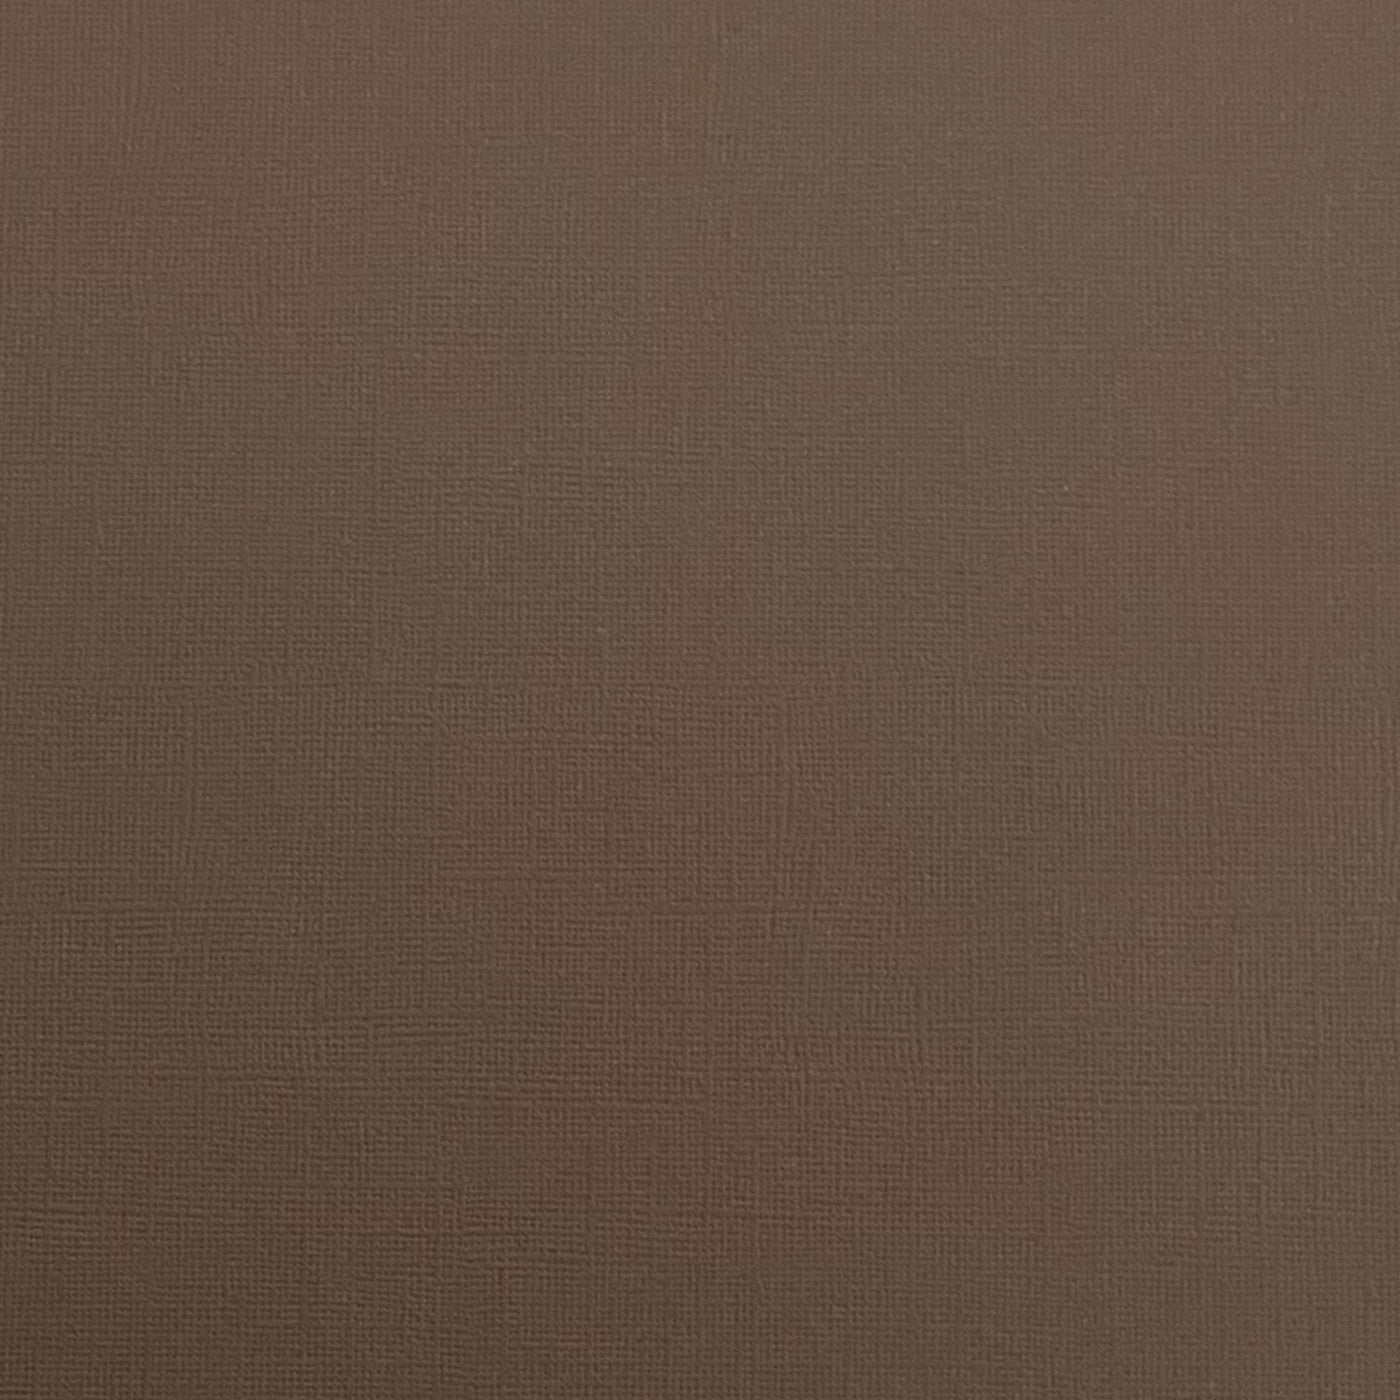 MAPLE SYRUP - Textured Brown 12x12 Cardstock - Encore Paper